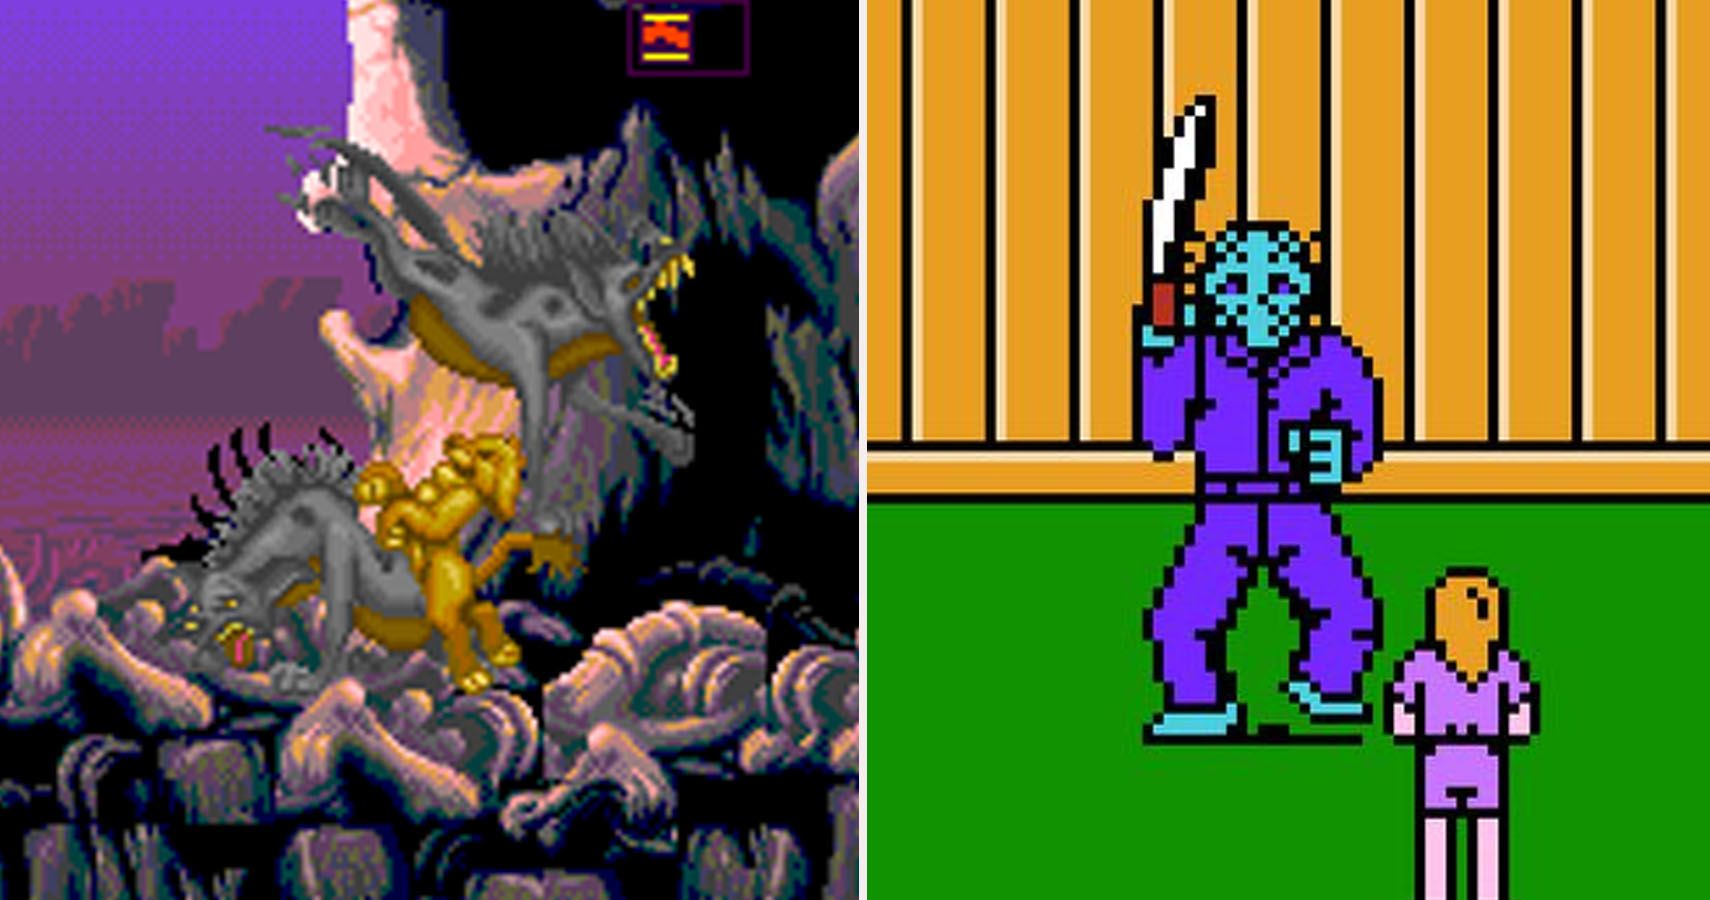 15 Retro Games That Are IMPOSSIBLE To Beat